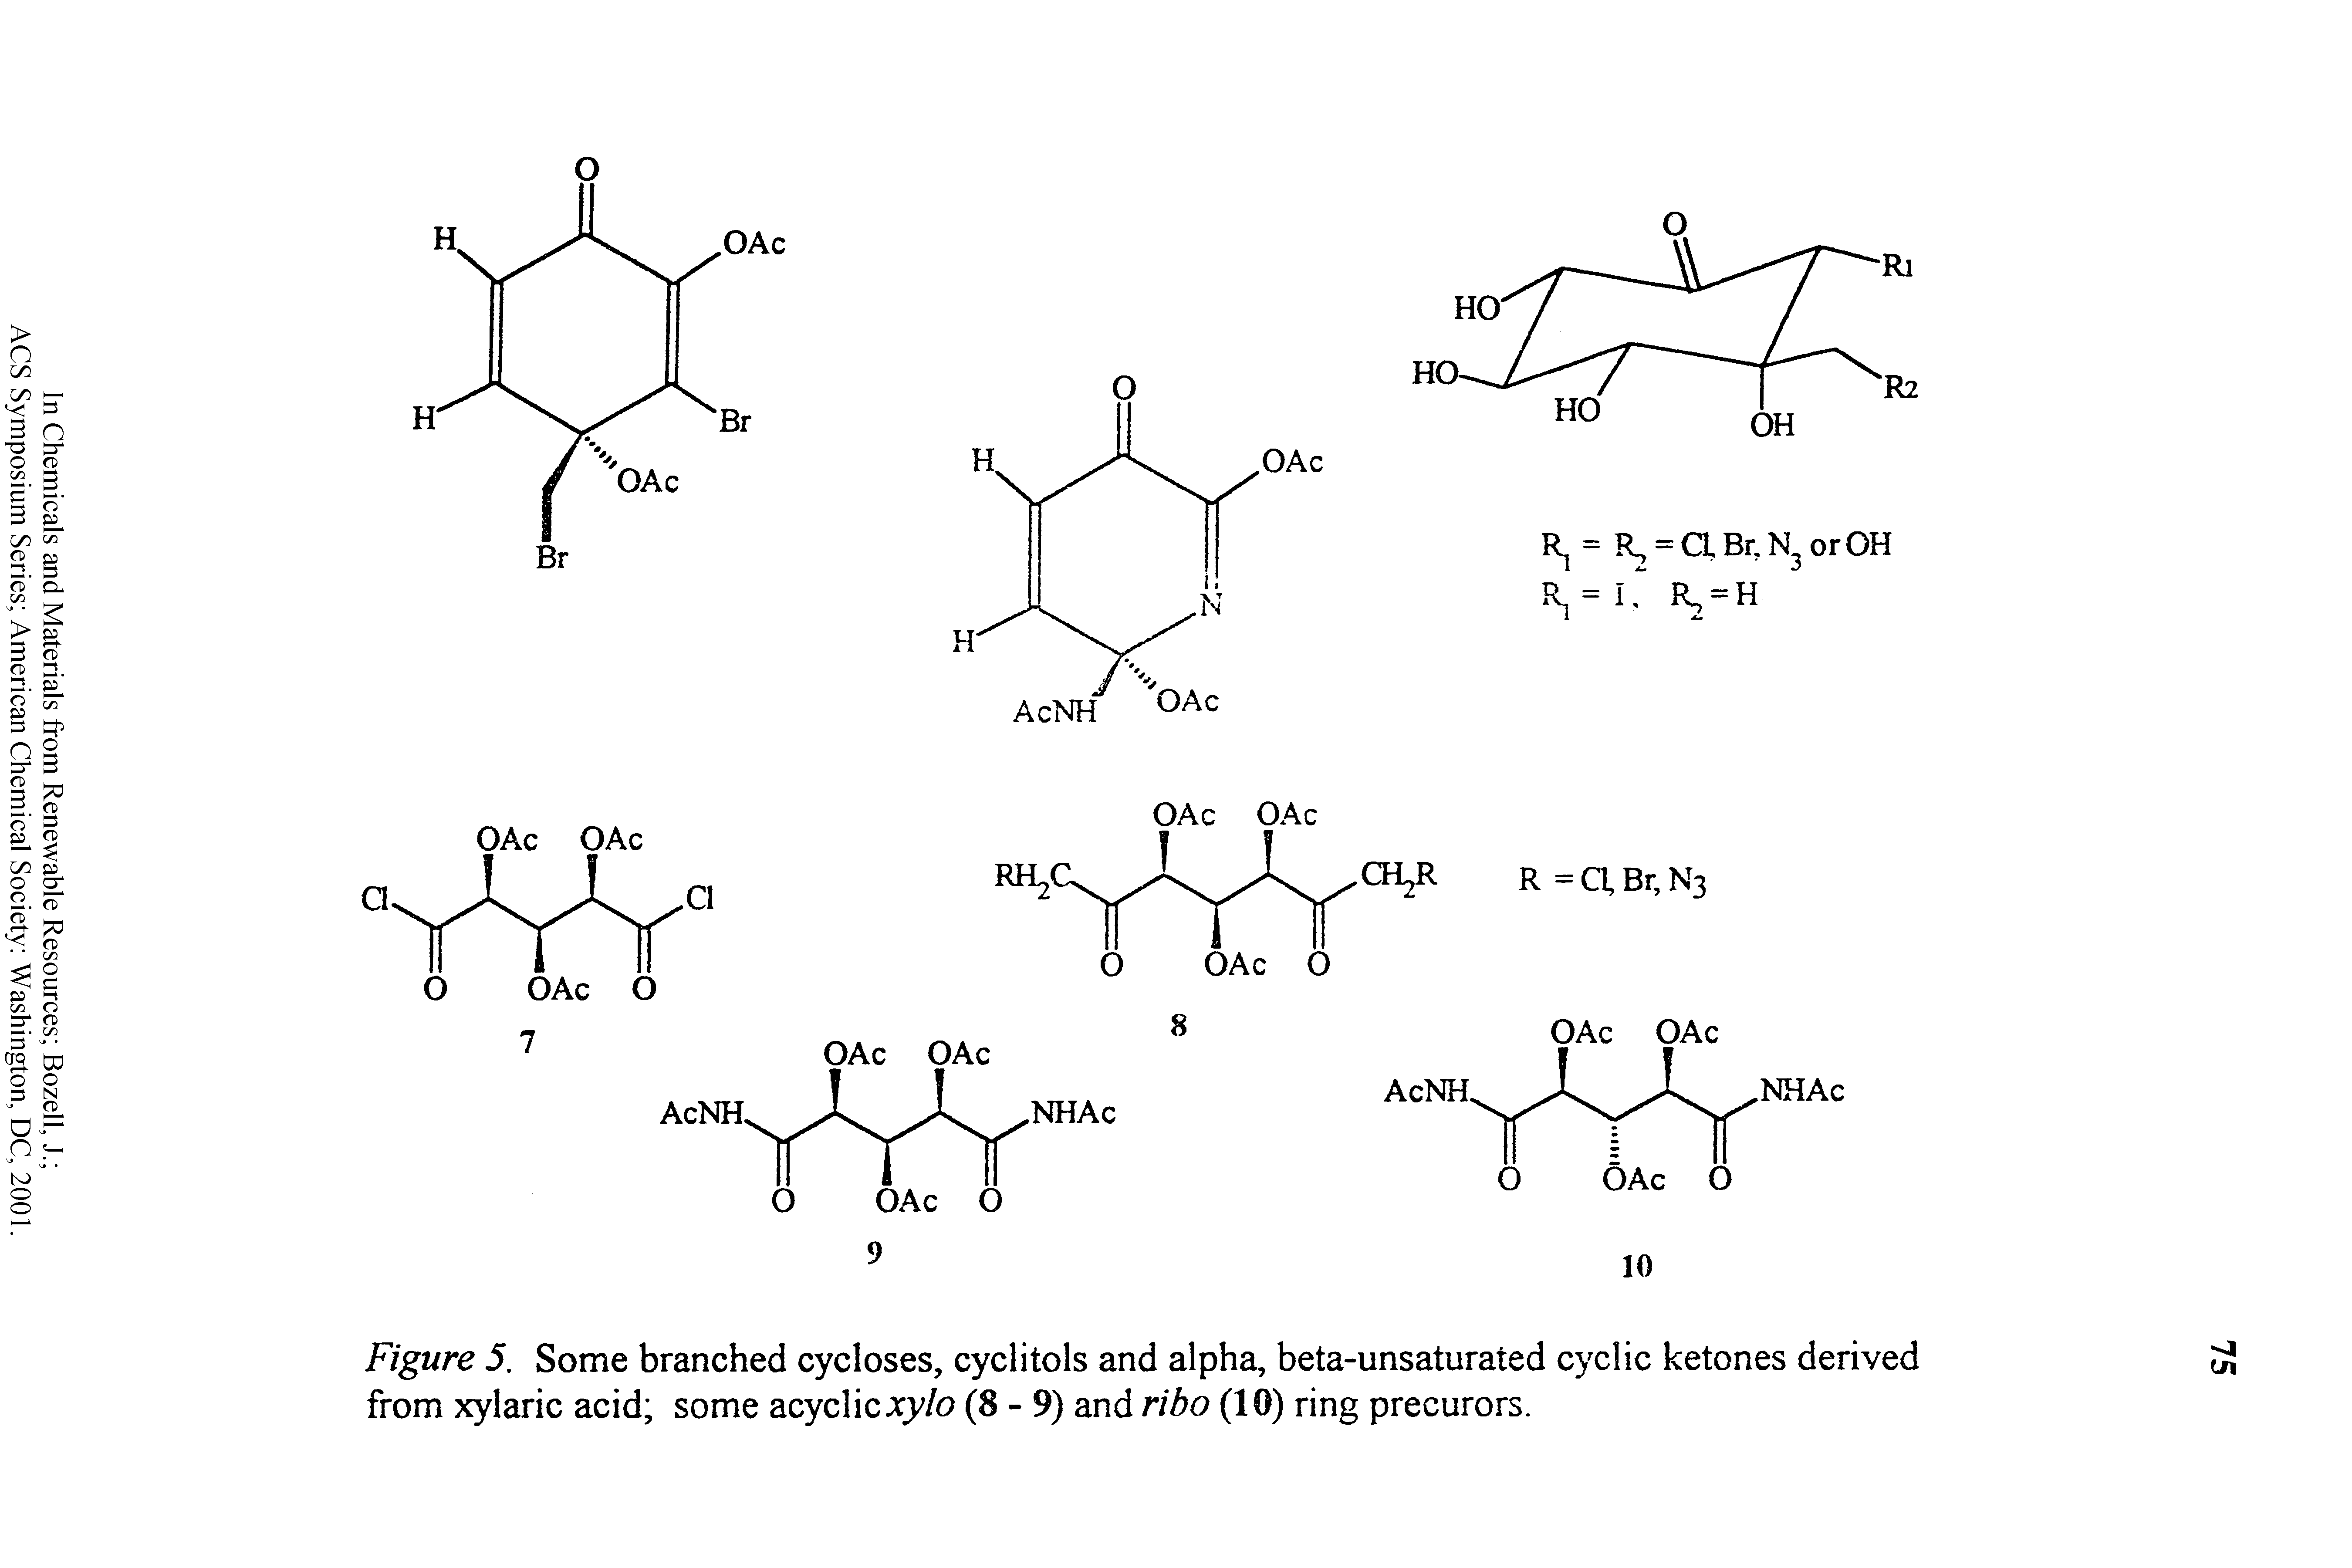 Figure 5. Some branched cycloses, cyclitols and alpha, beta-unsaturated cyclic ketones derived from xylaric acid some acyclic c> /o (8 - 9) and ribo (10) ring precurors.